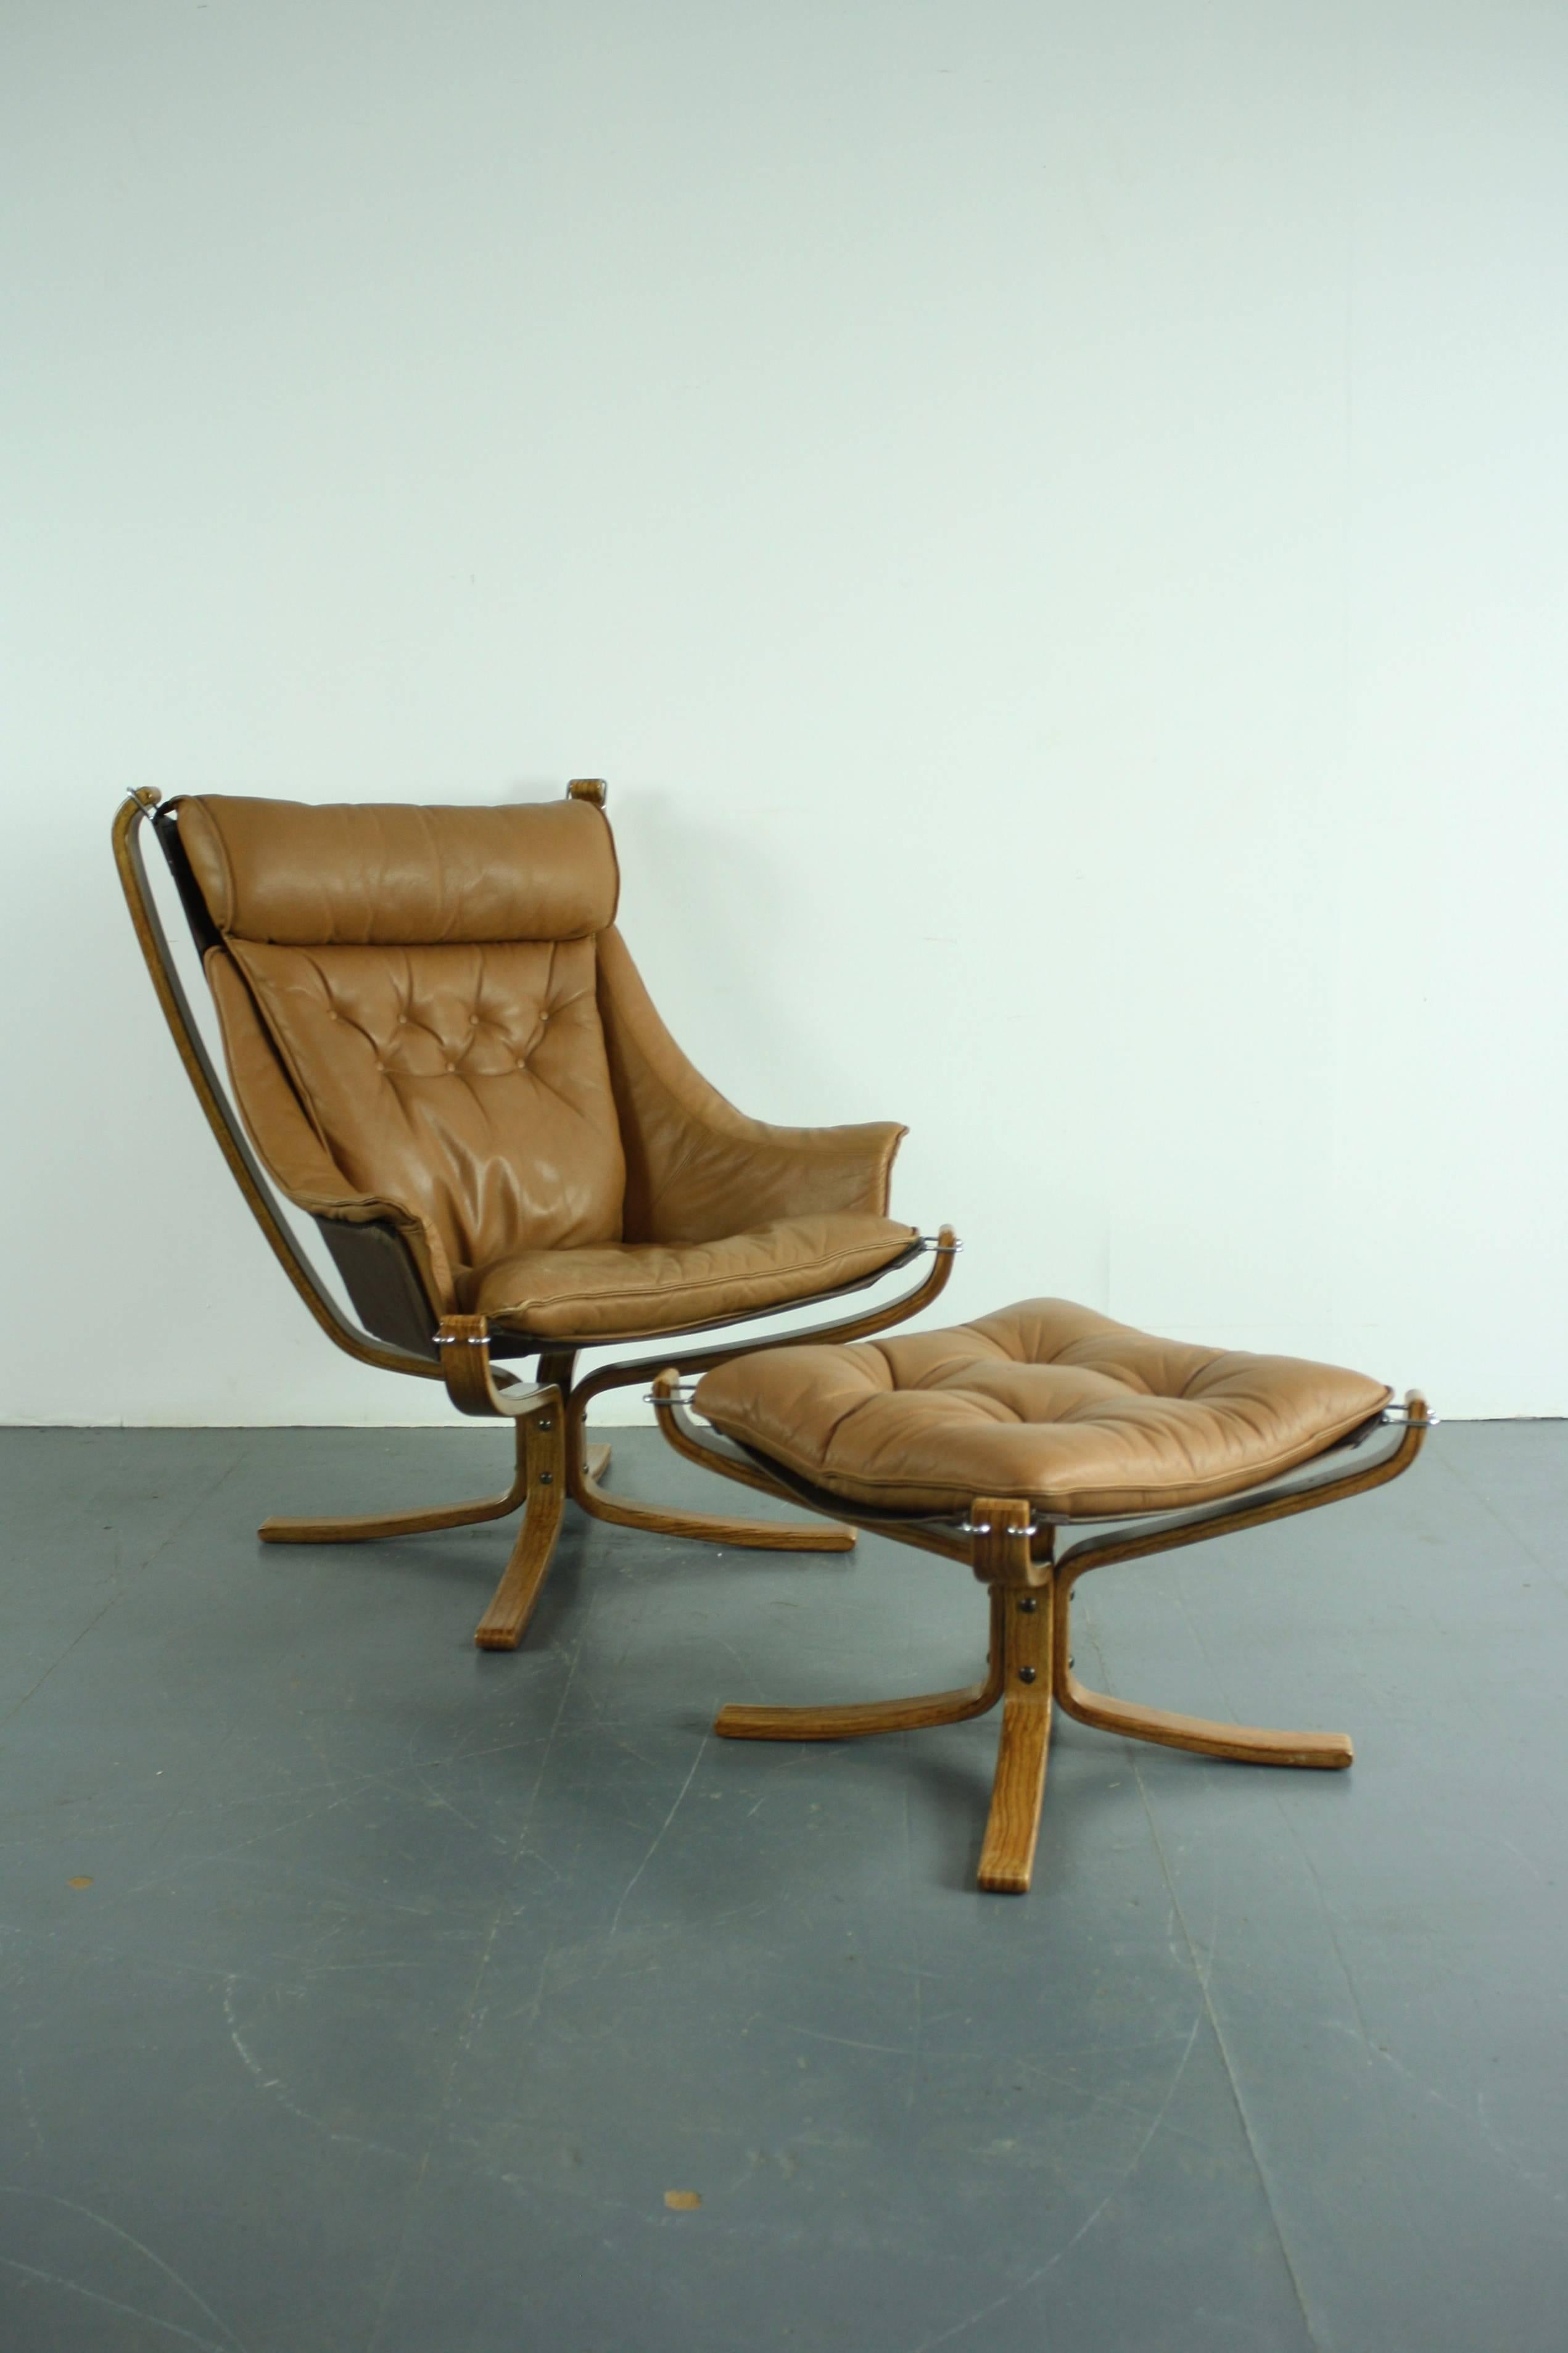 High back winged camel brown vintage leather Falcon chair designed by Sigurd Resell with matching ottoman. With limited edition custom-made legs made by Vante Mobler specially for the previous owner to match their interior, making this color very